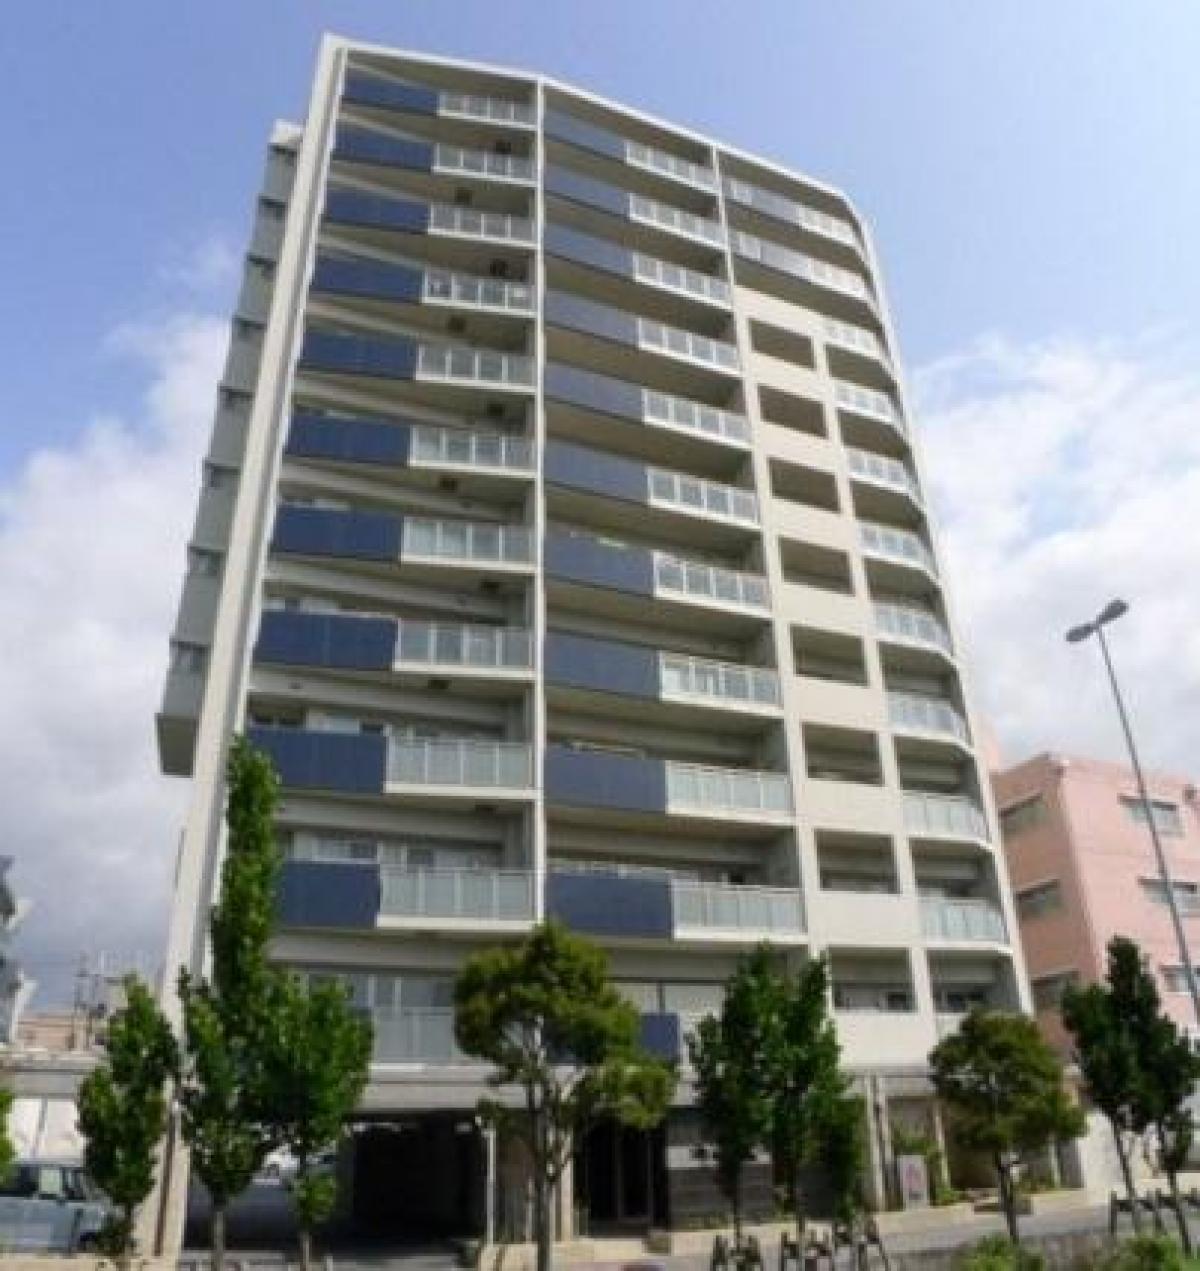 Picture of Apartment For Sale in Ginowan Shi, Okinawa, Japan